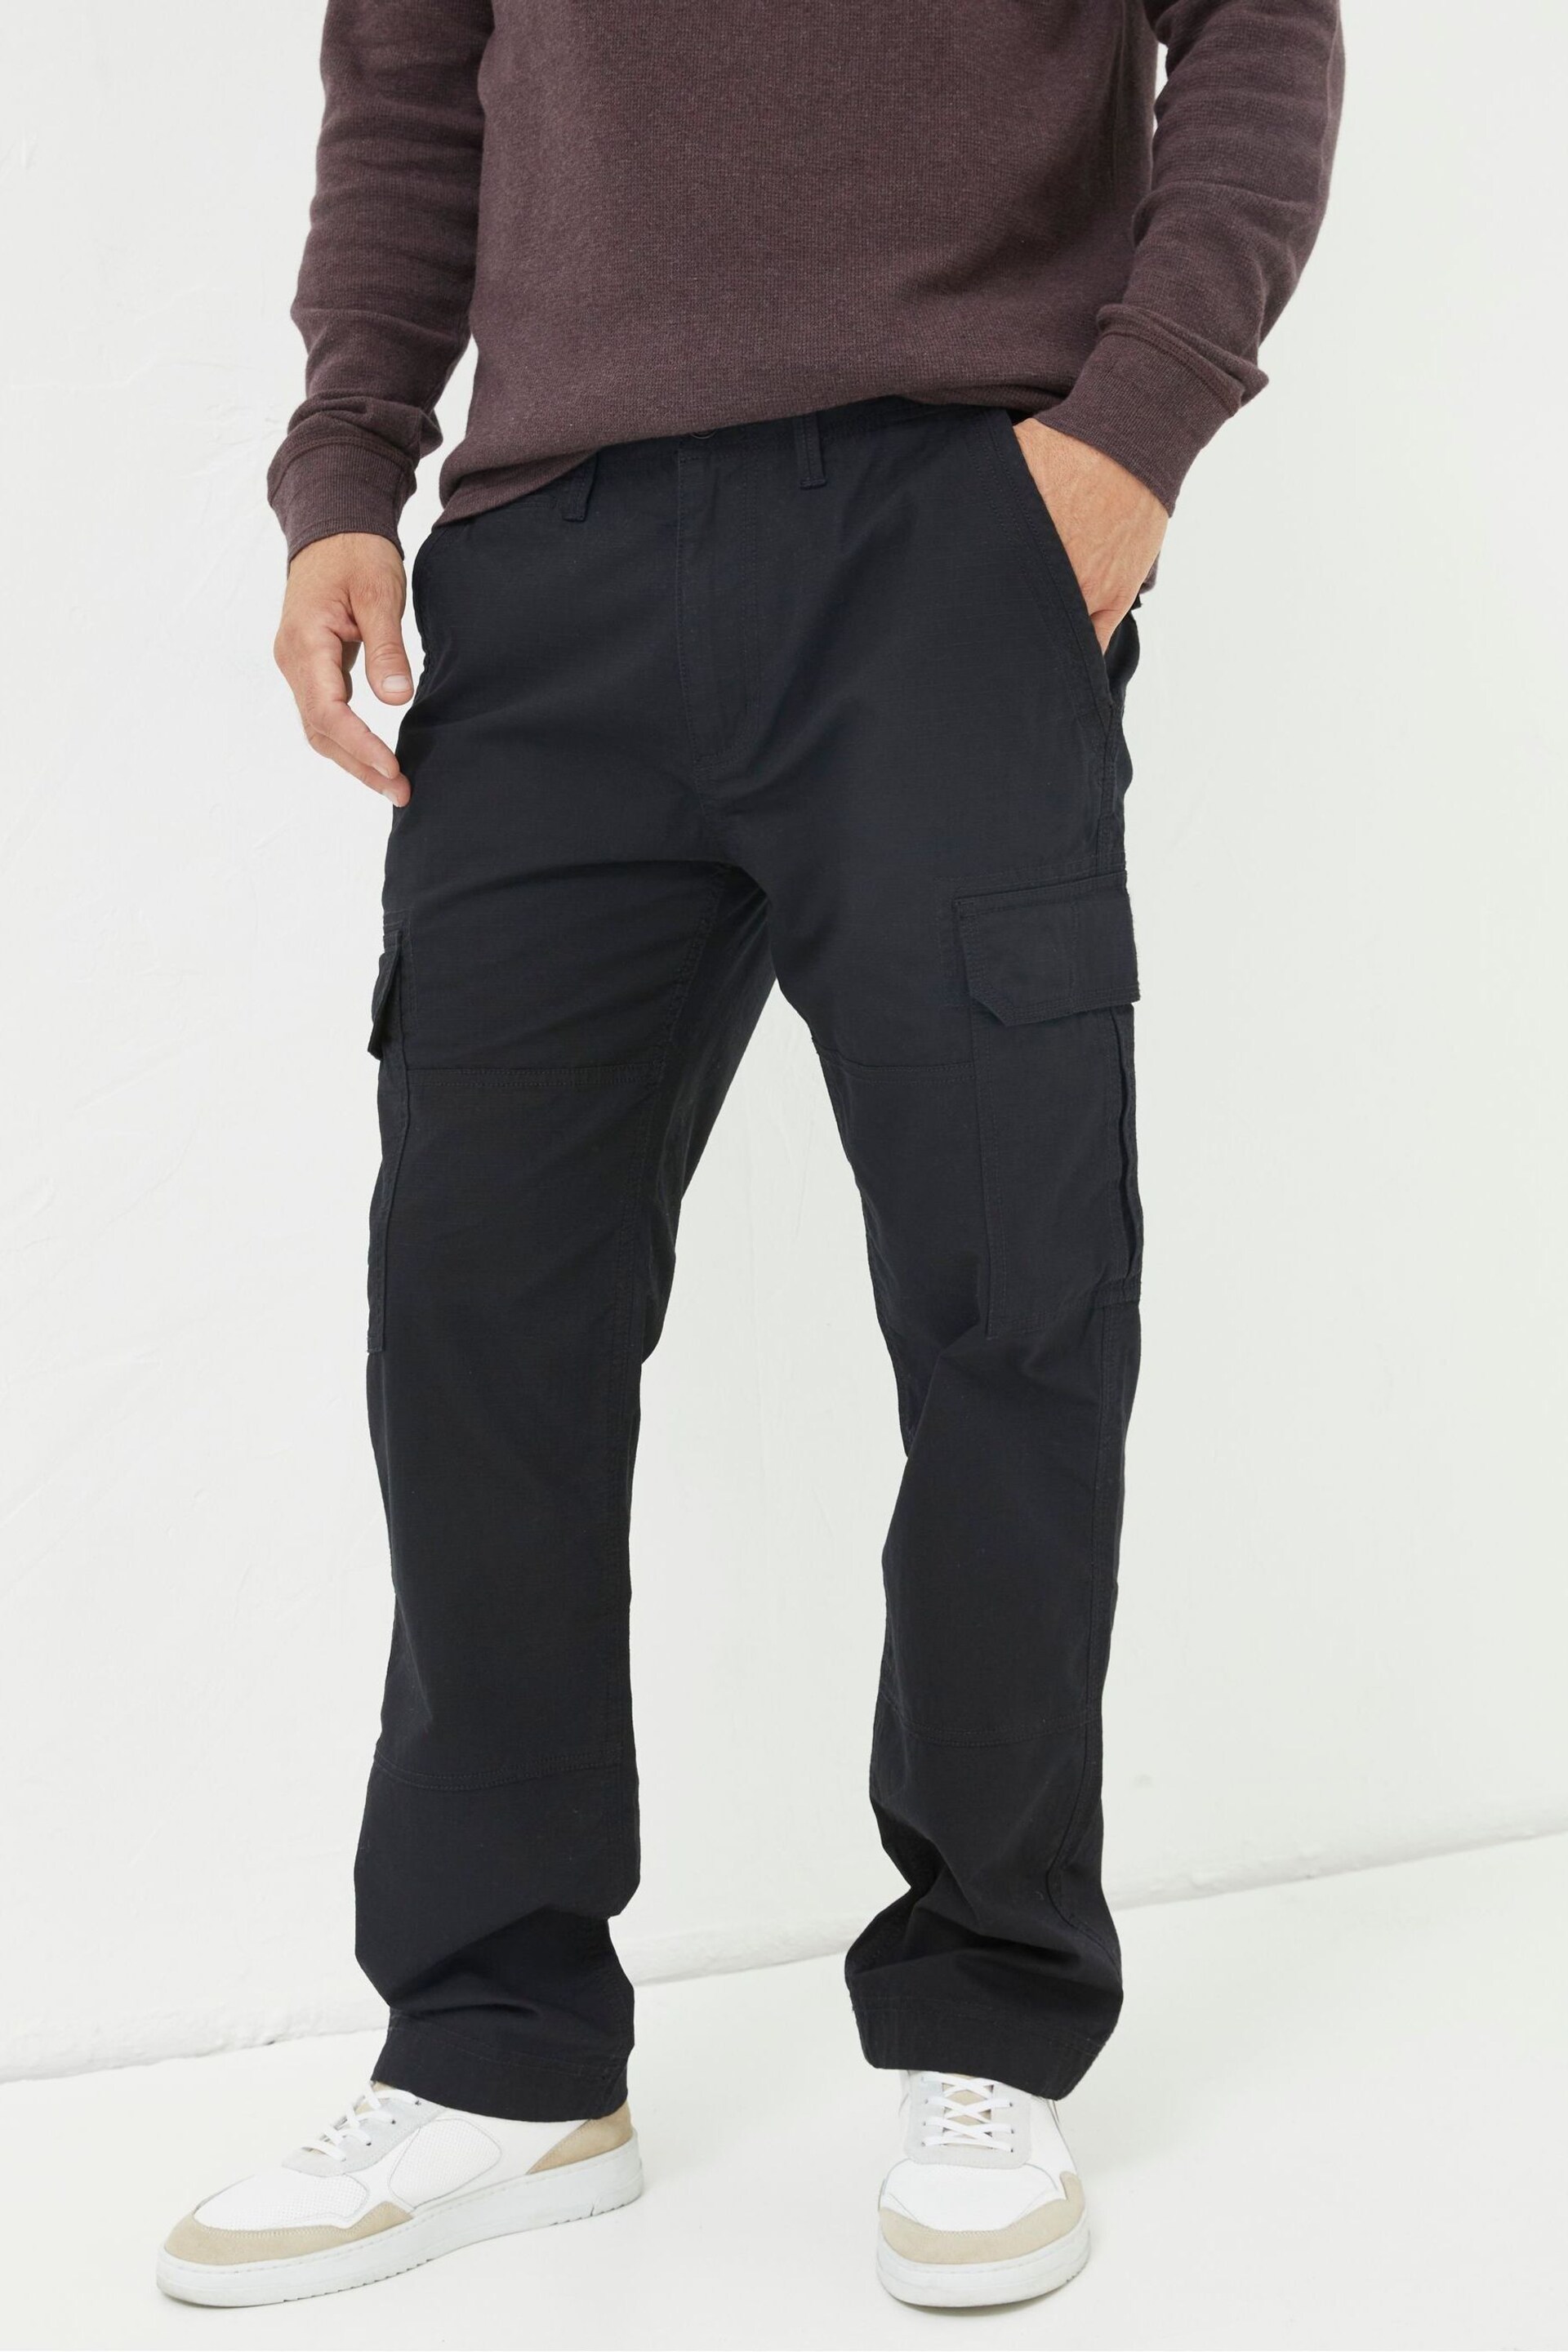 FatFace Black Ripstop Cargo Trousers - Image 1 of 5